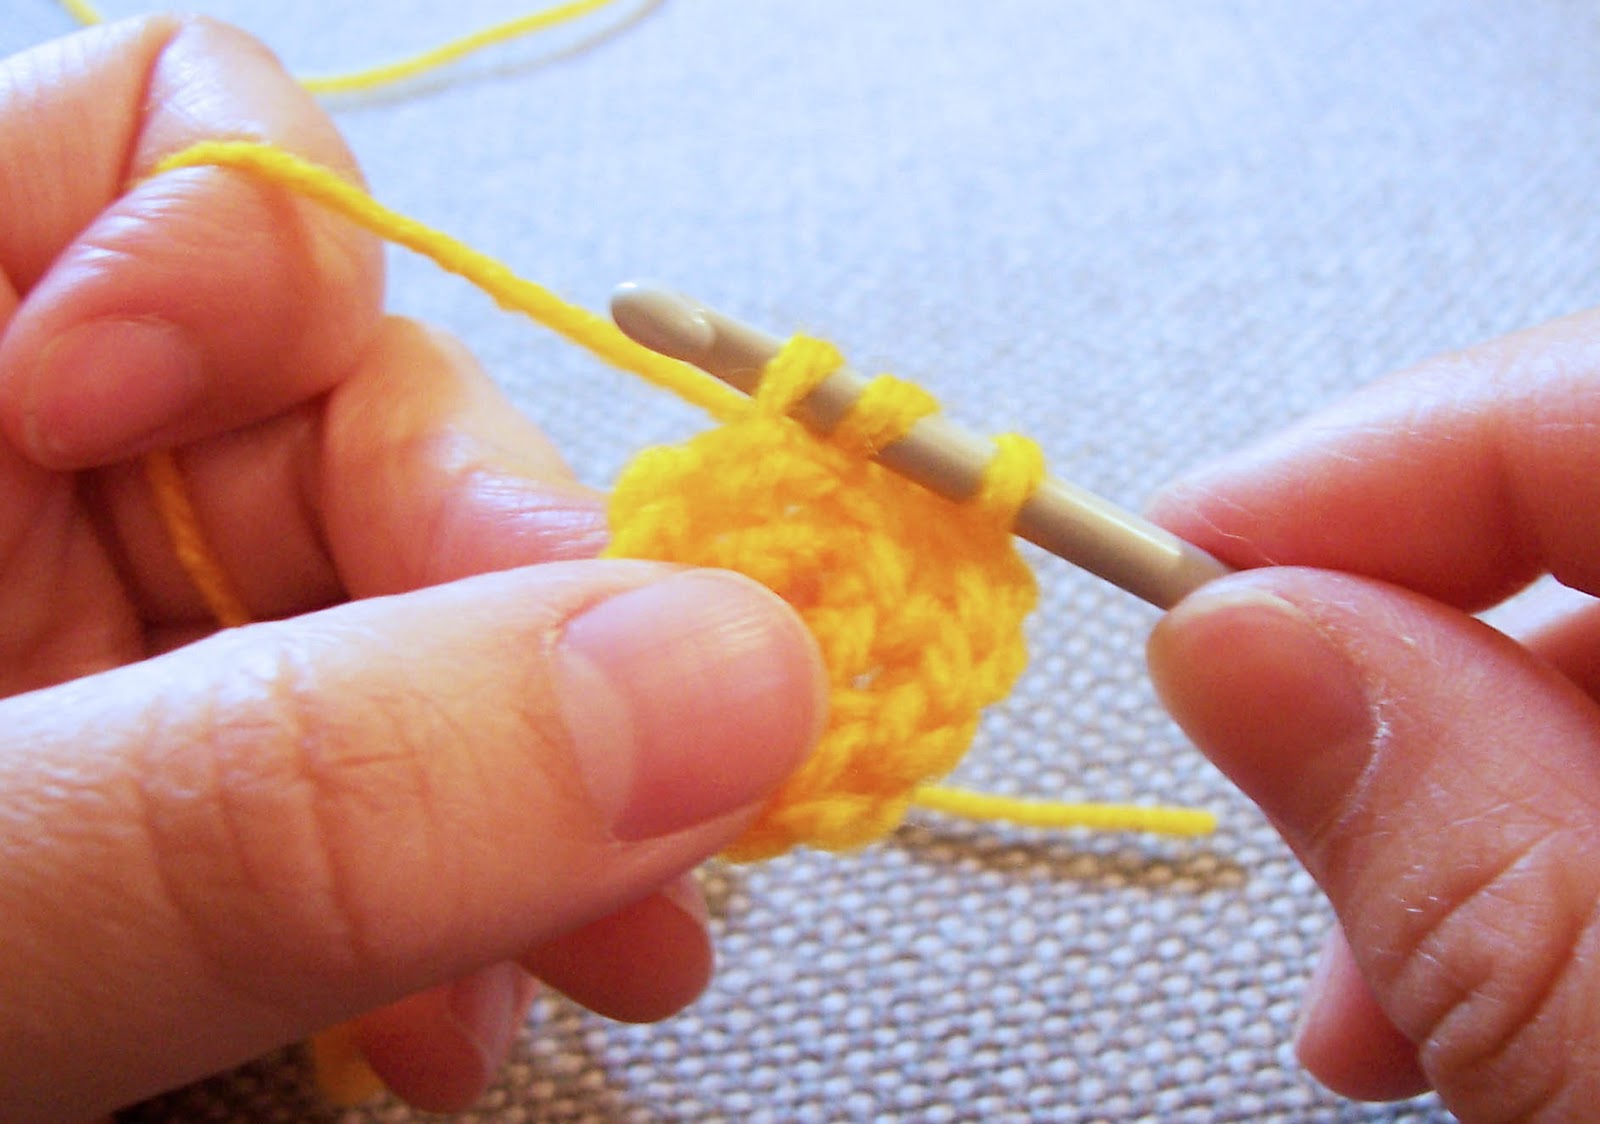 Three different ways to decrease stitches in a row or round in crochet, including  the invisible decrease, skipping a stitch and single crochet 2 stitches together.